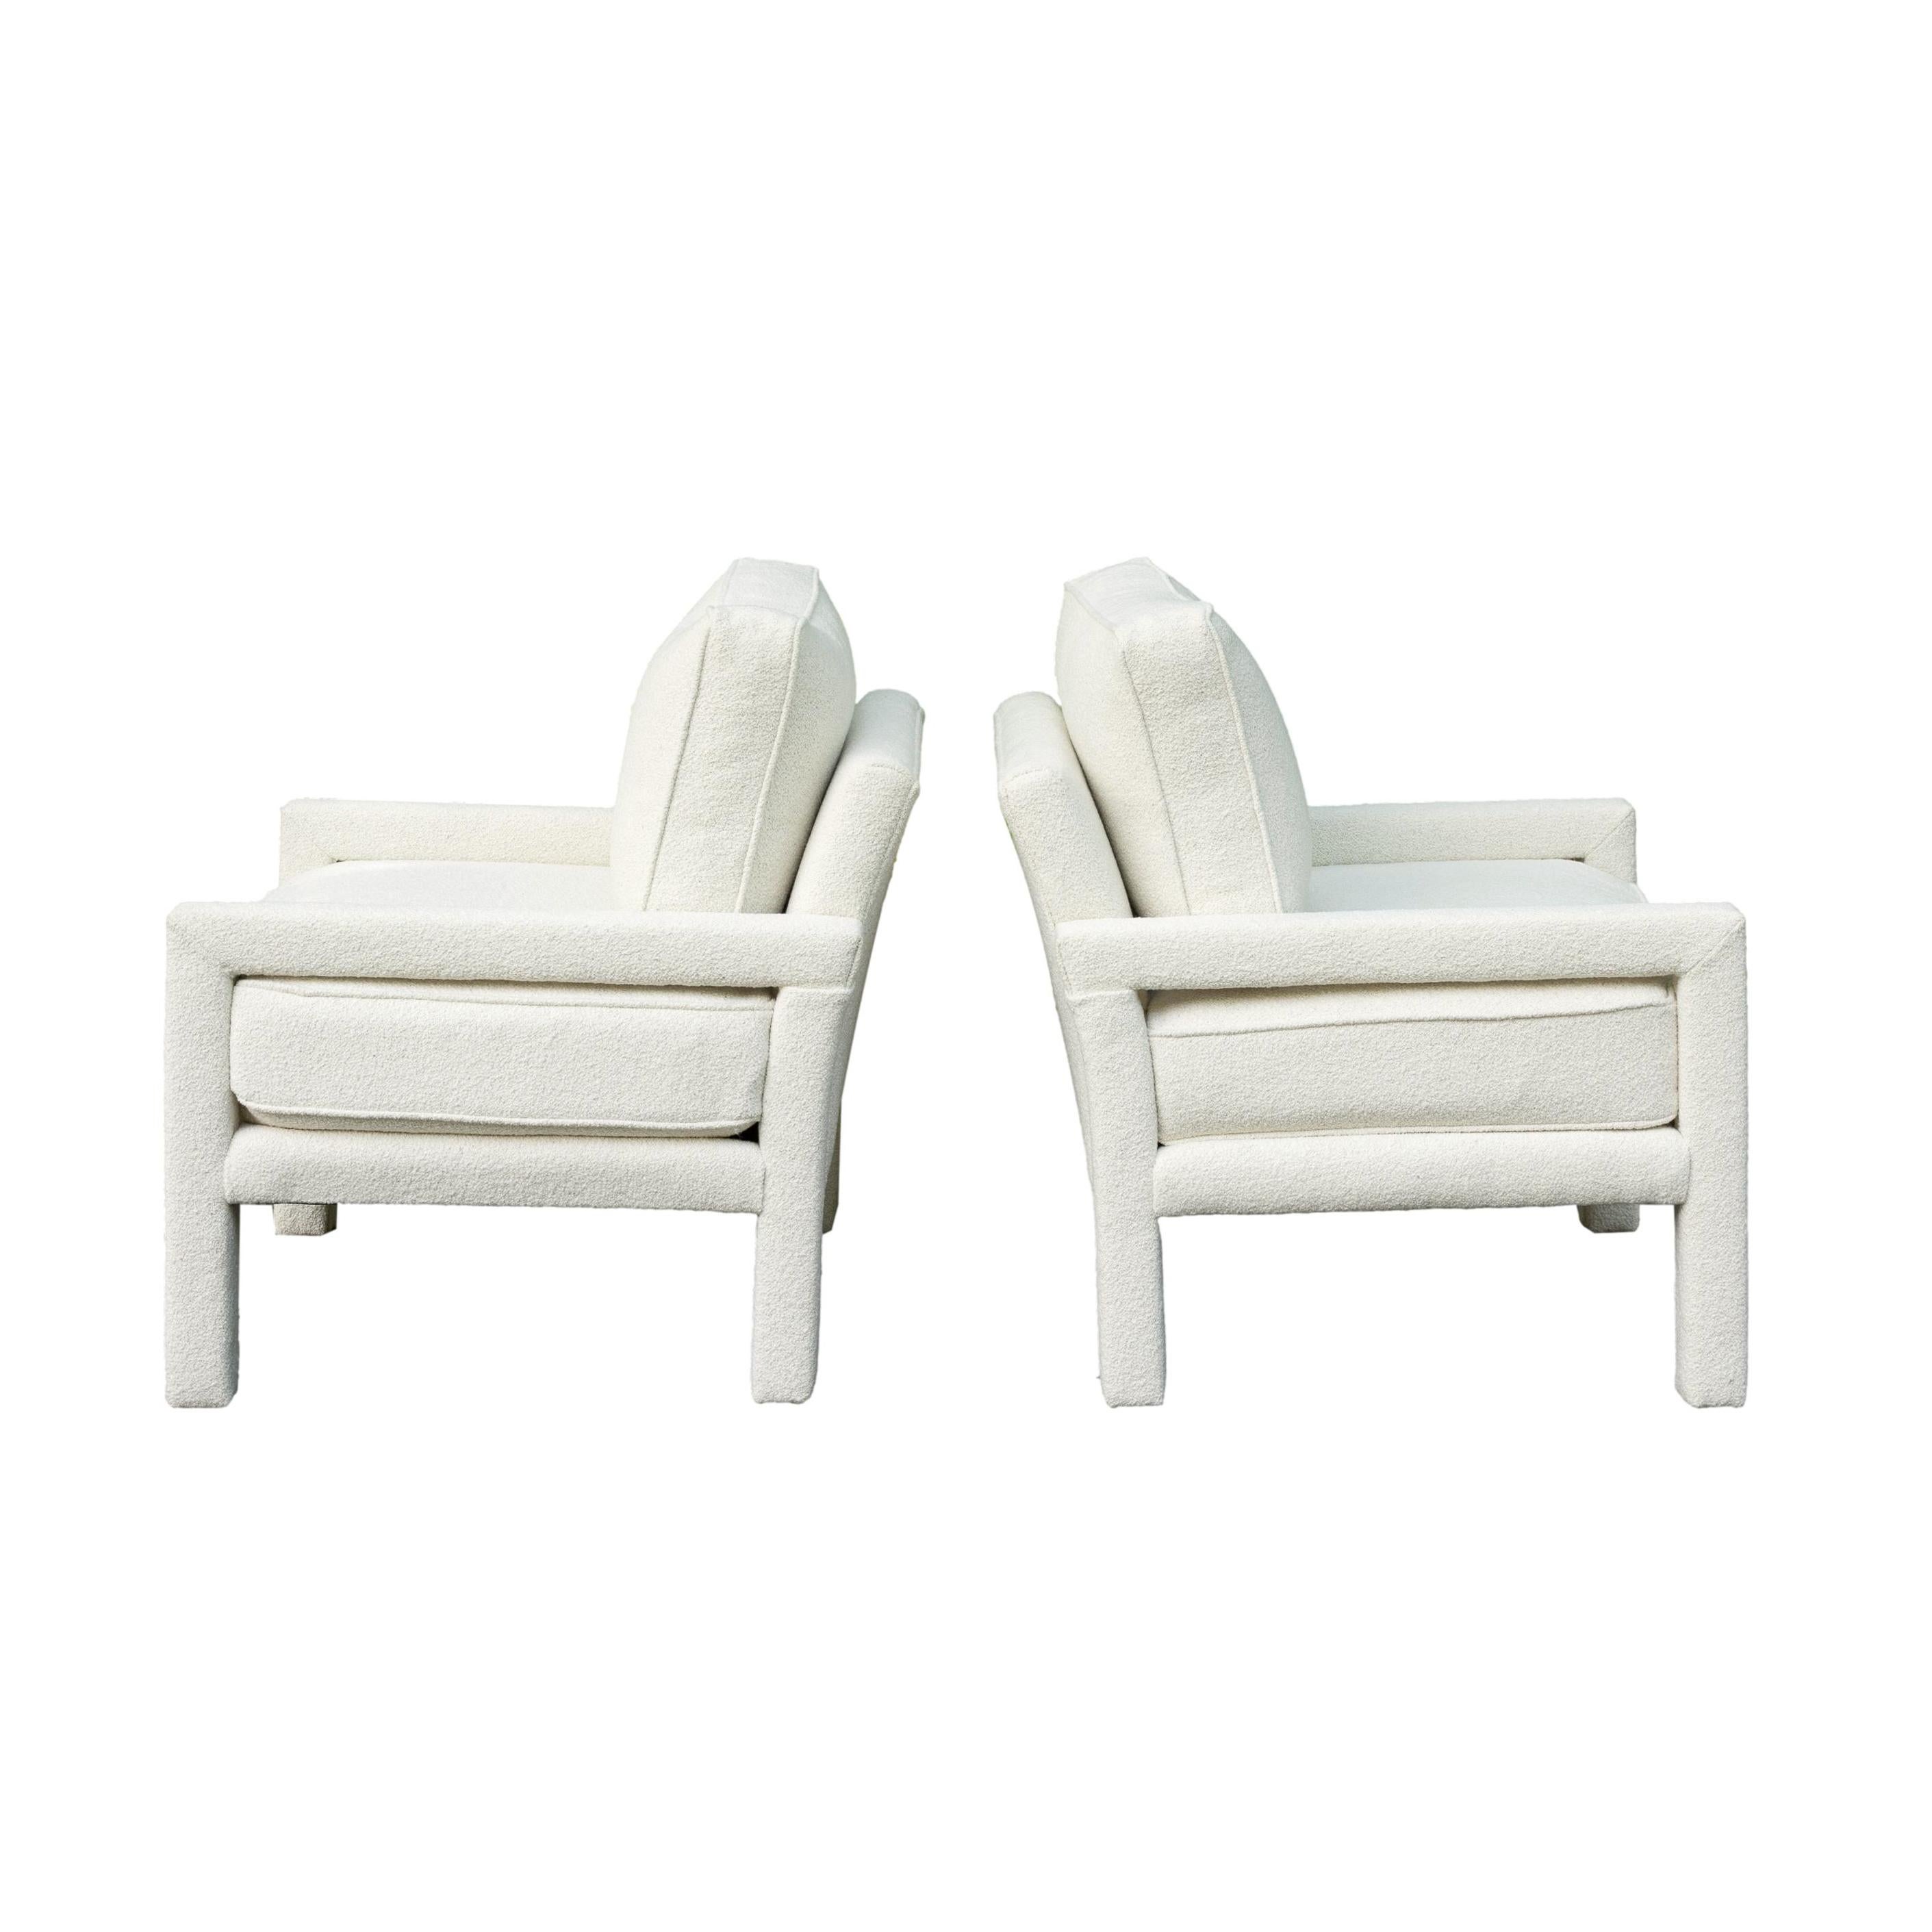 Hand-Crafted Pair of New Milo Baughman-Style Parsons Chairs in Scalamandre Ladakh Boucle